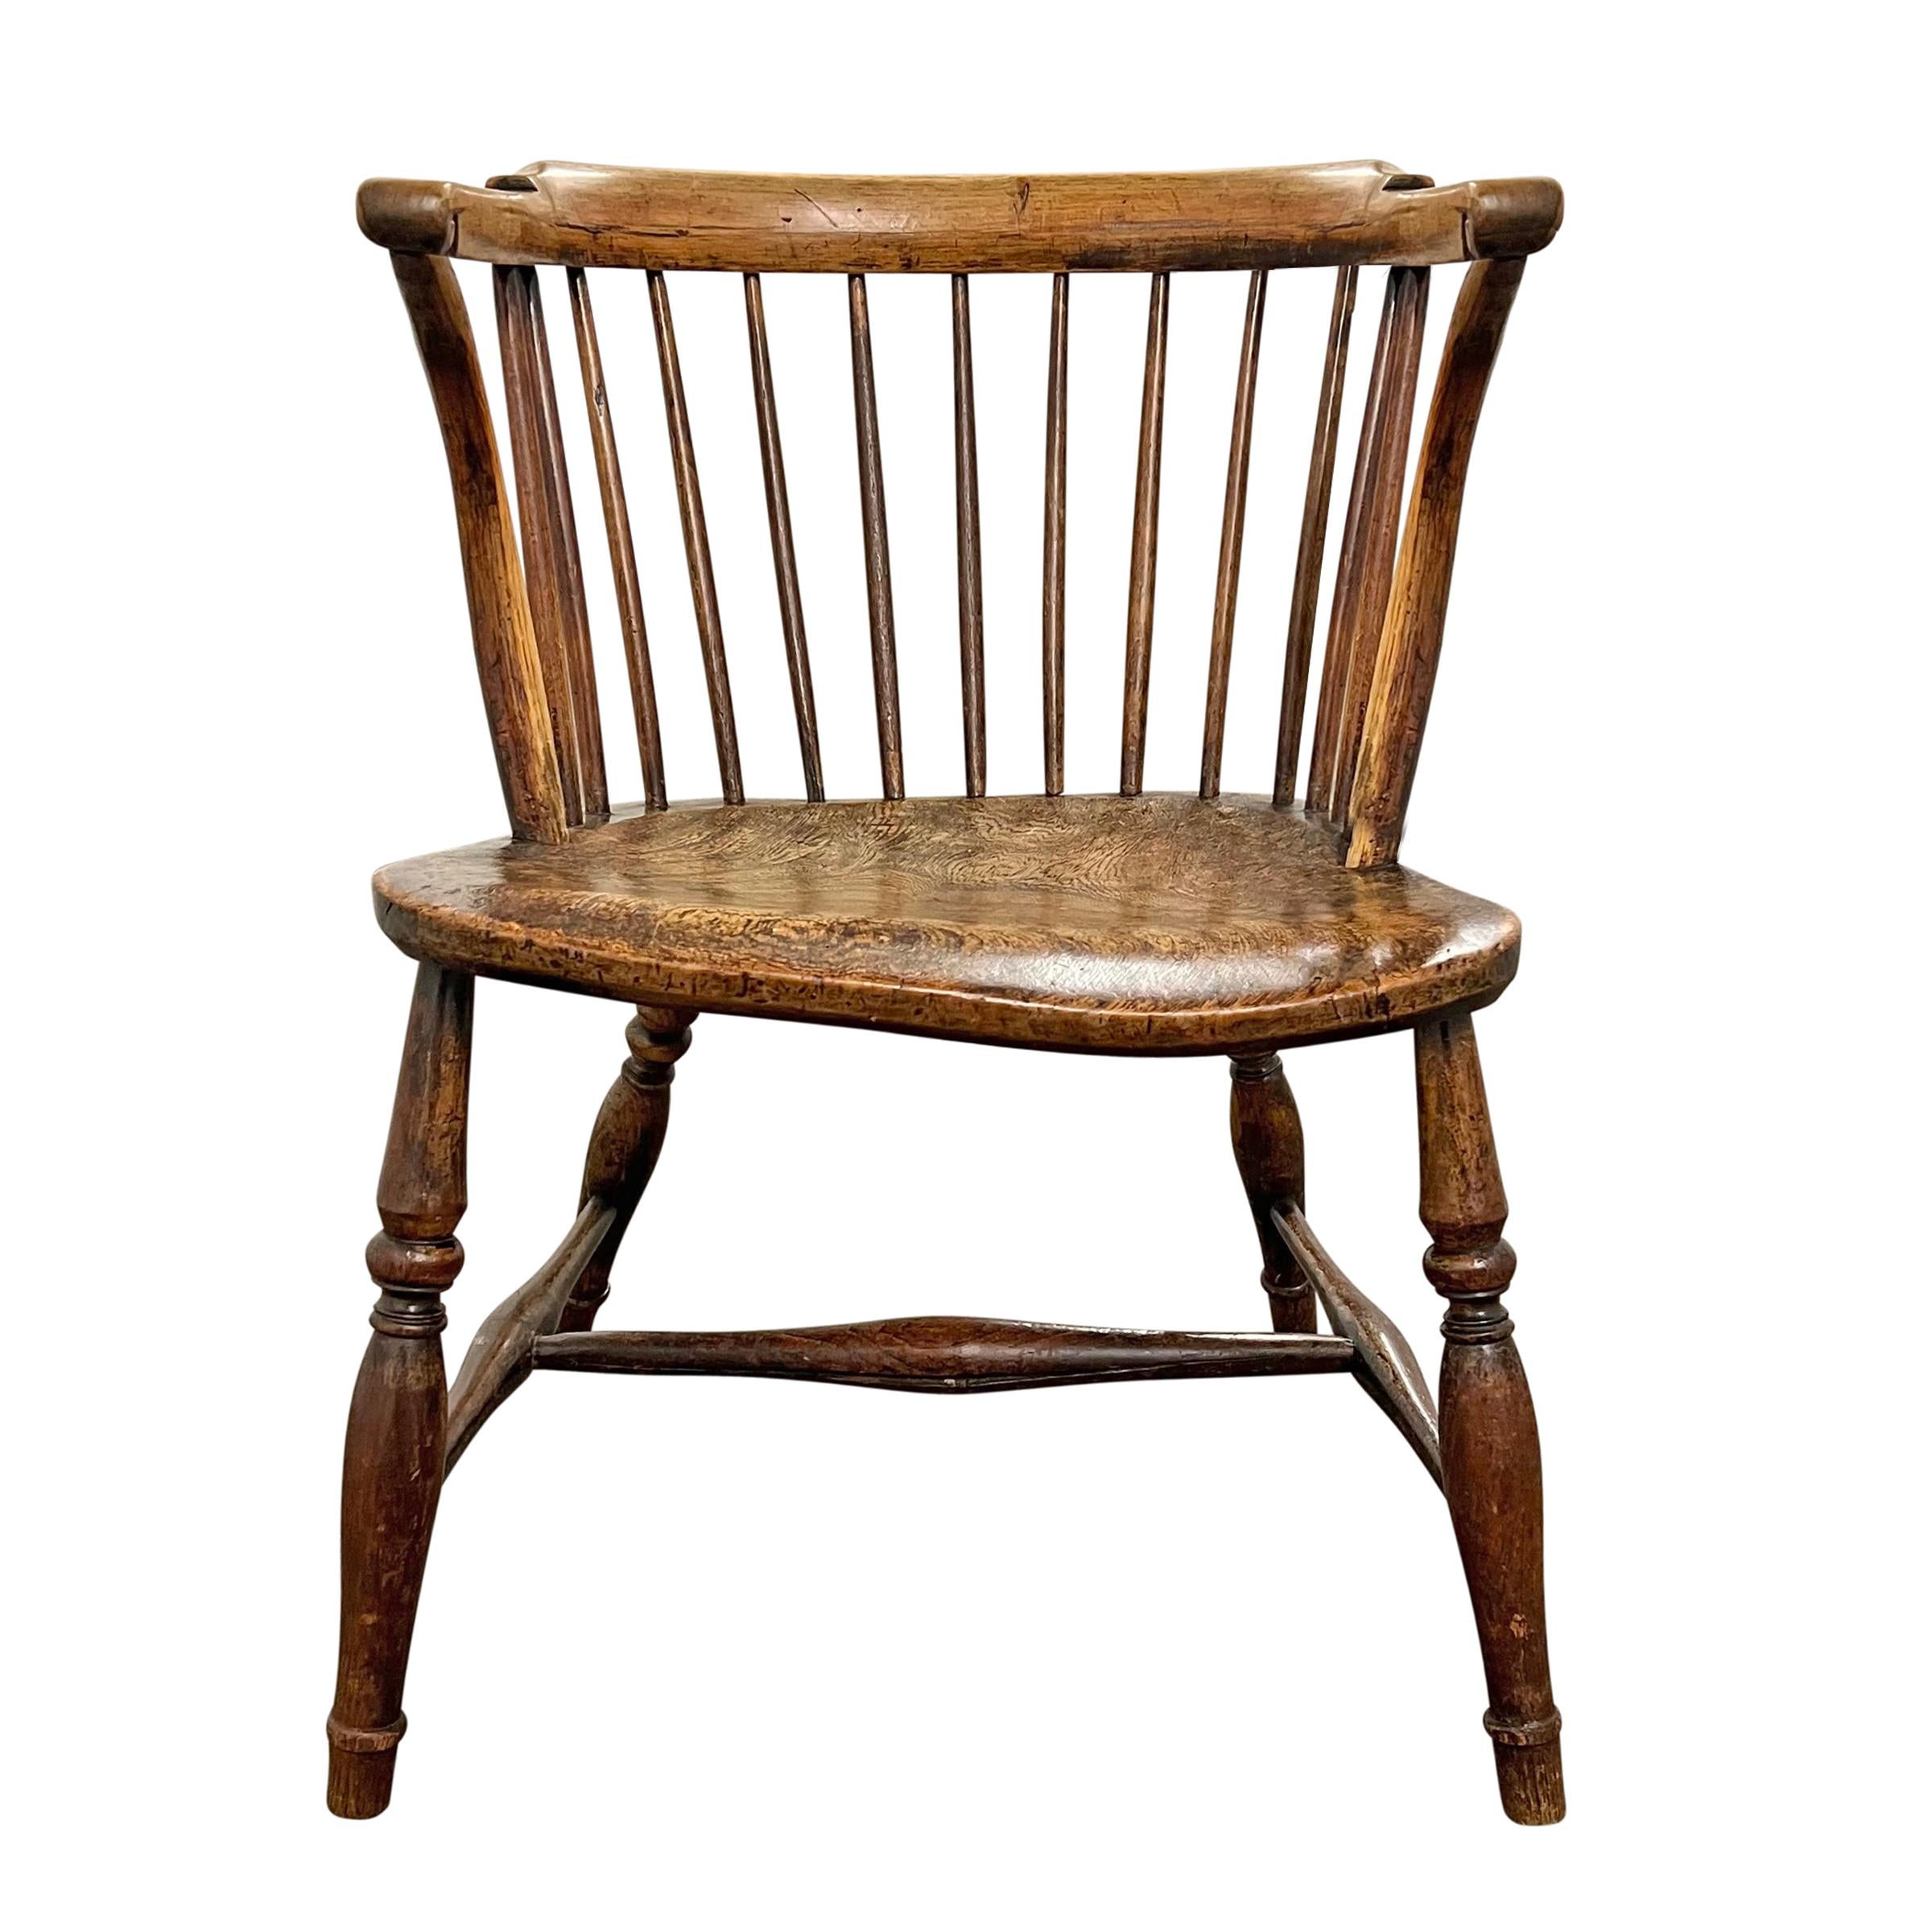 English 19th Century Low-Back Windsor Chair For Sale